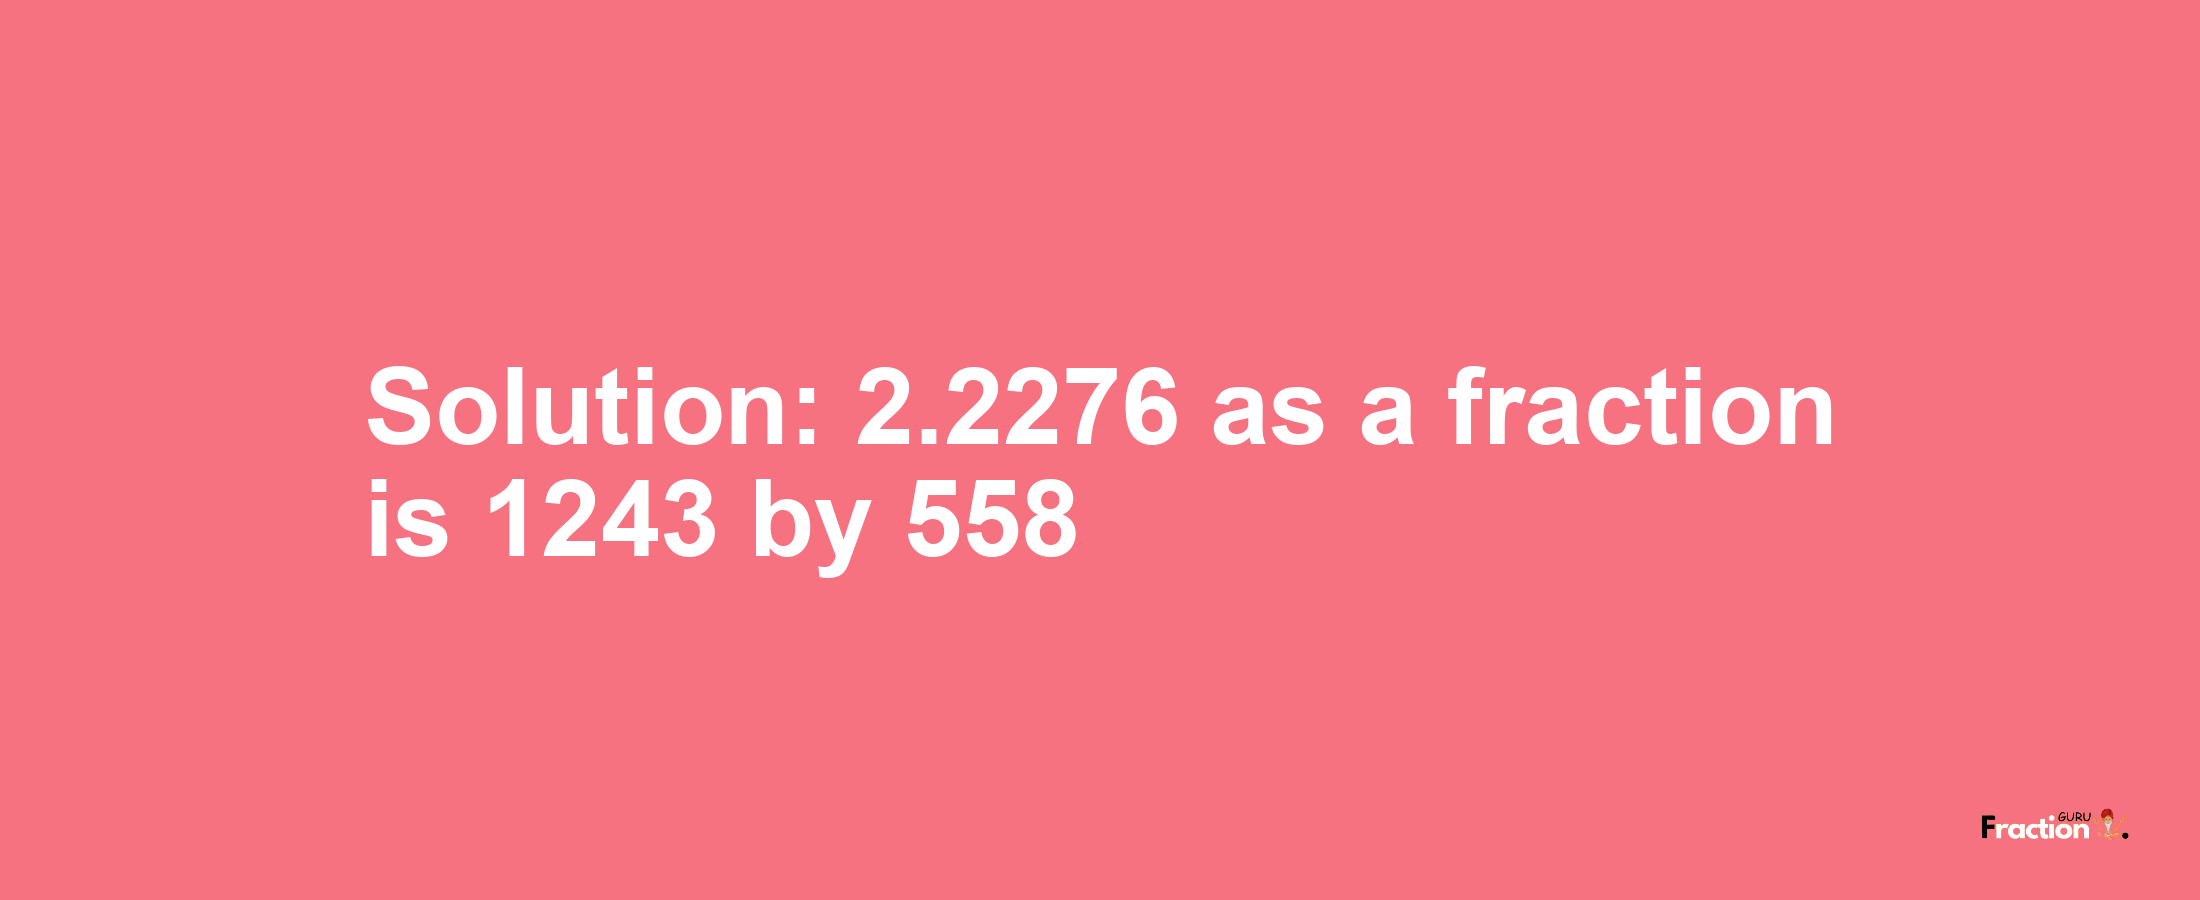 Solution:2.2276 as a fraction is 1243/558